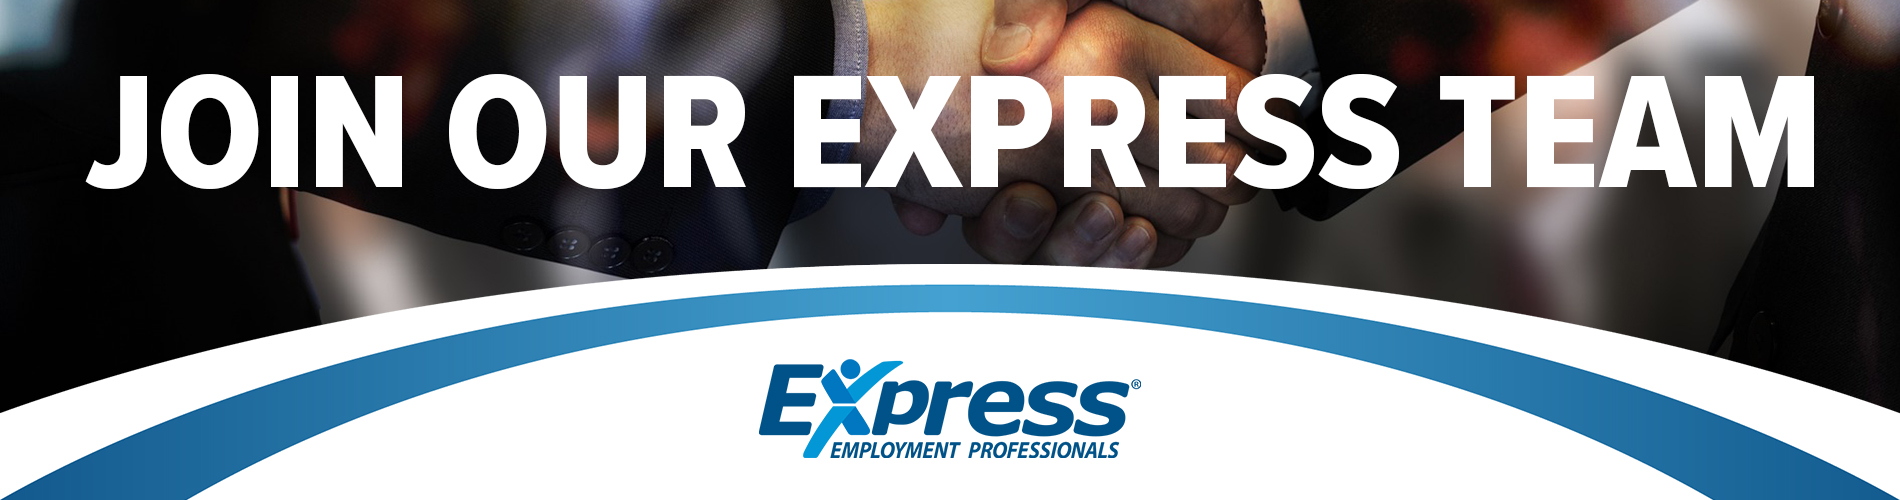 Join Our Express Team, Staffing Industry Jobs in Scottsdale, AZ